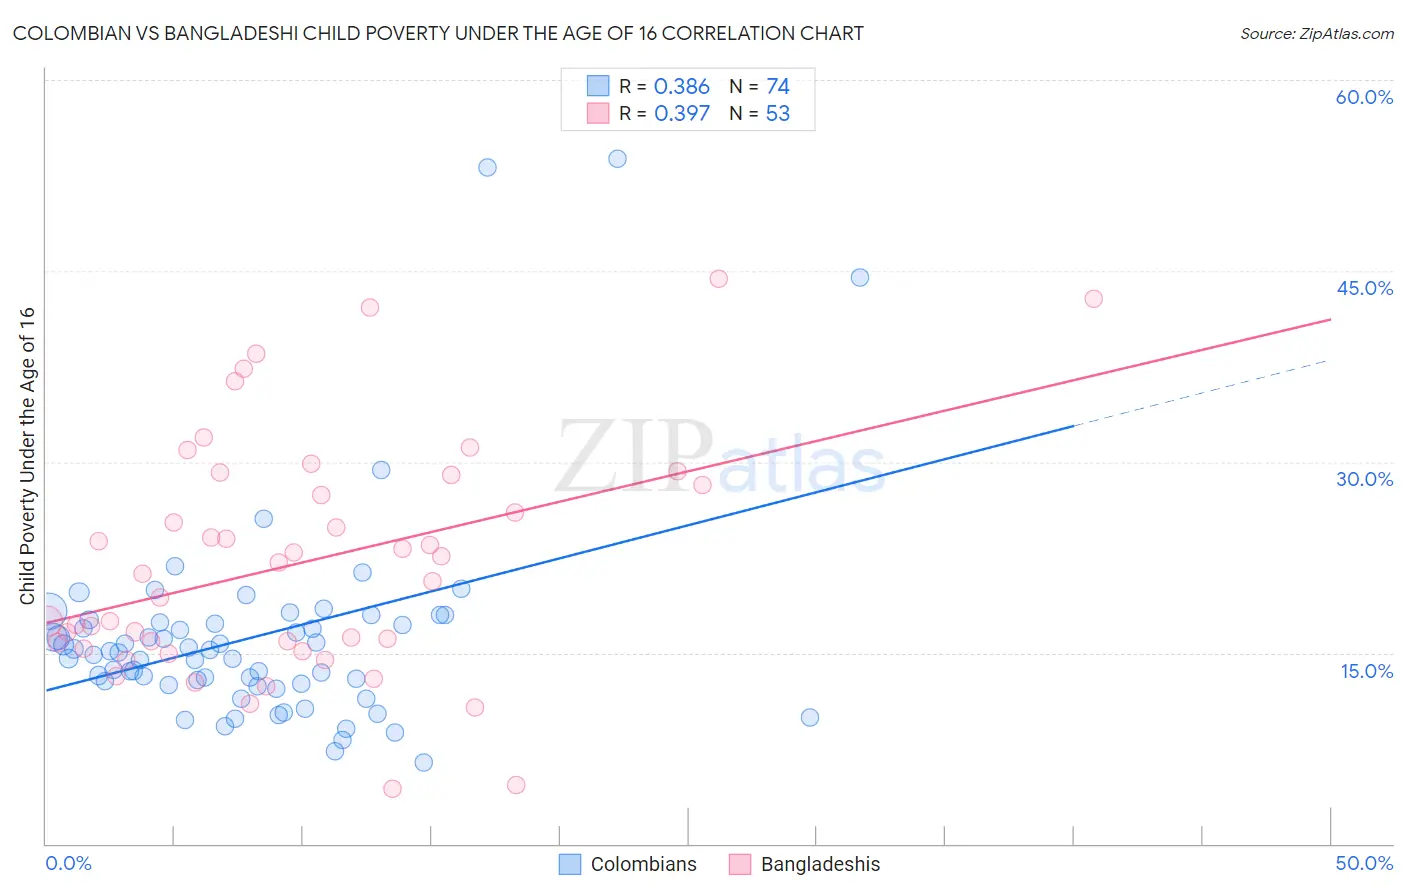 Colombian vs Bangladeshi Child Poverty Under the Age of 16